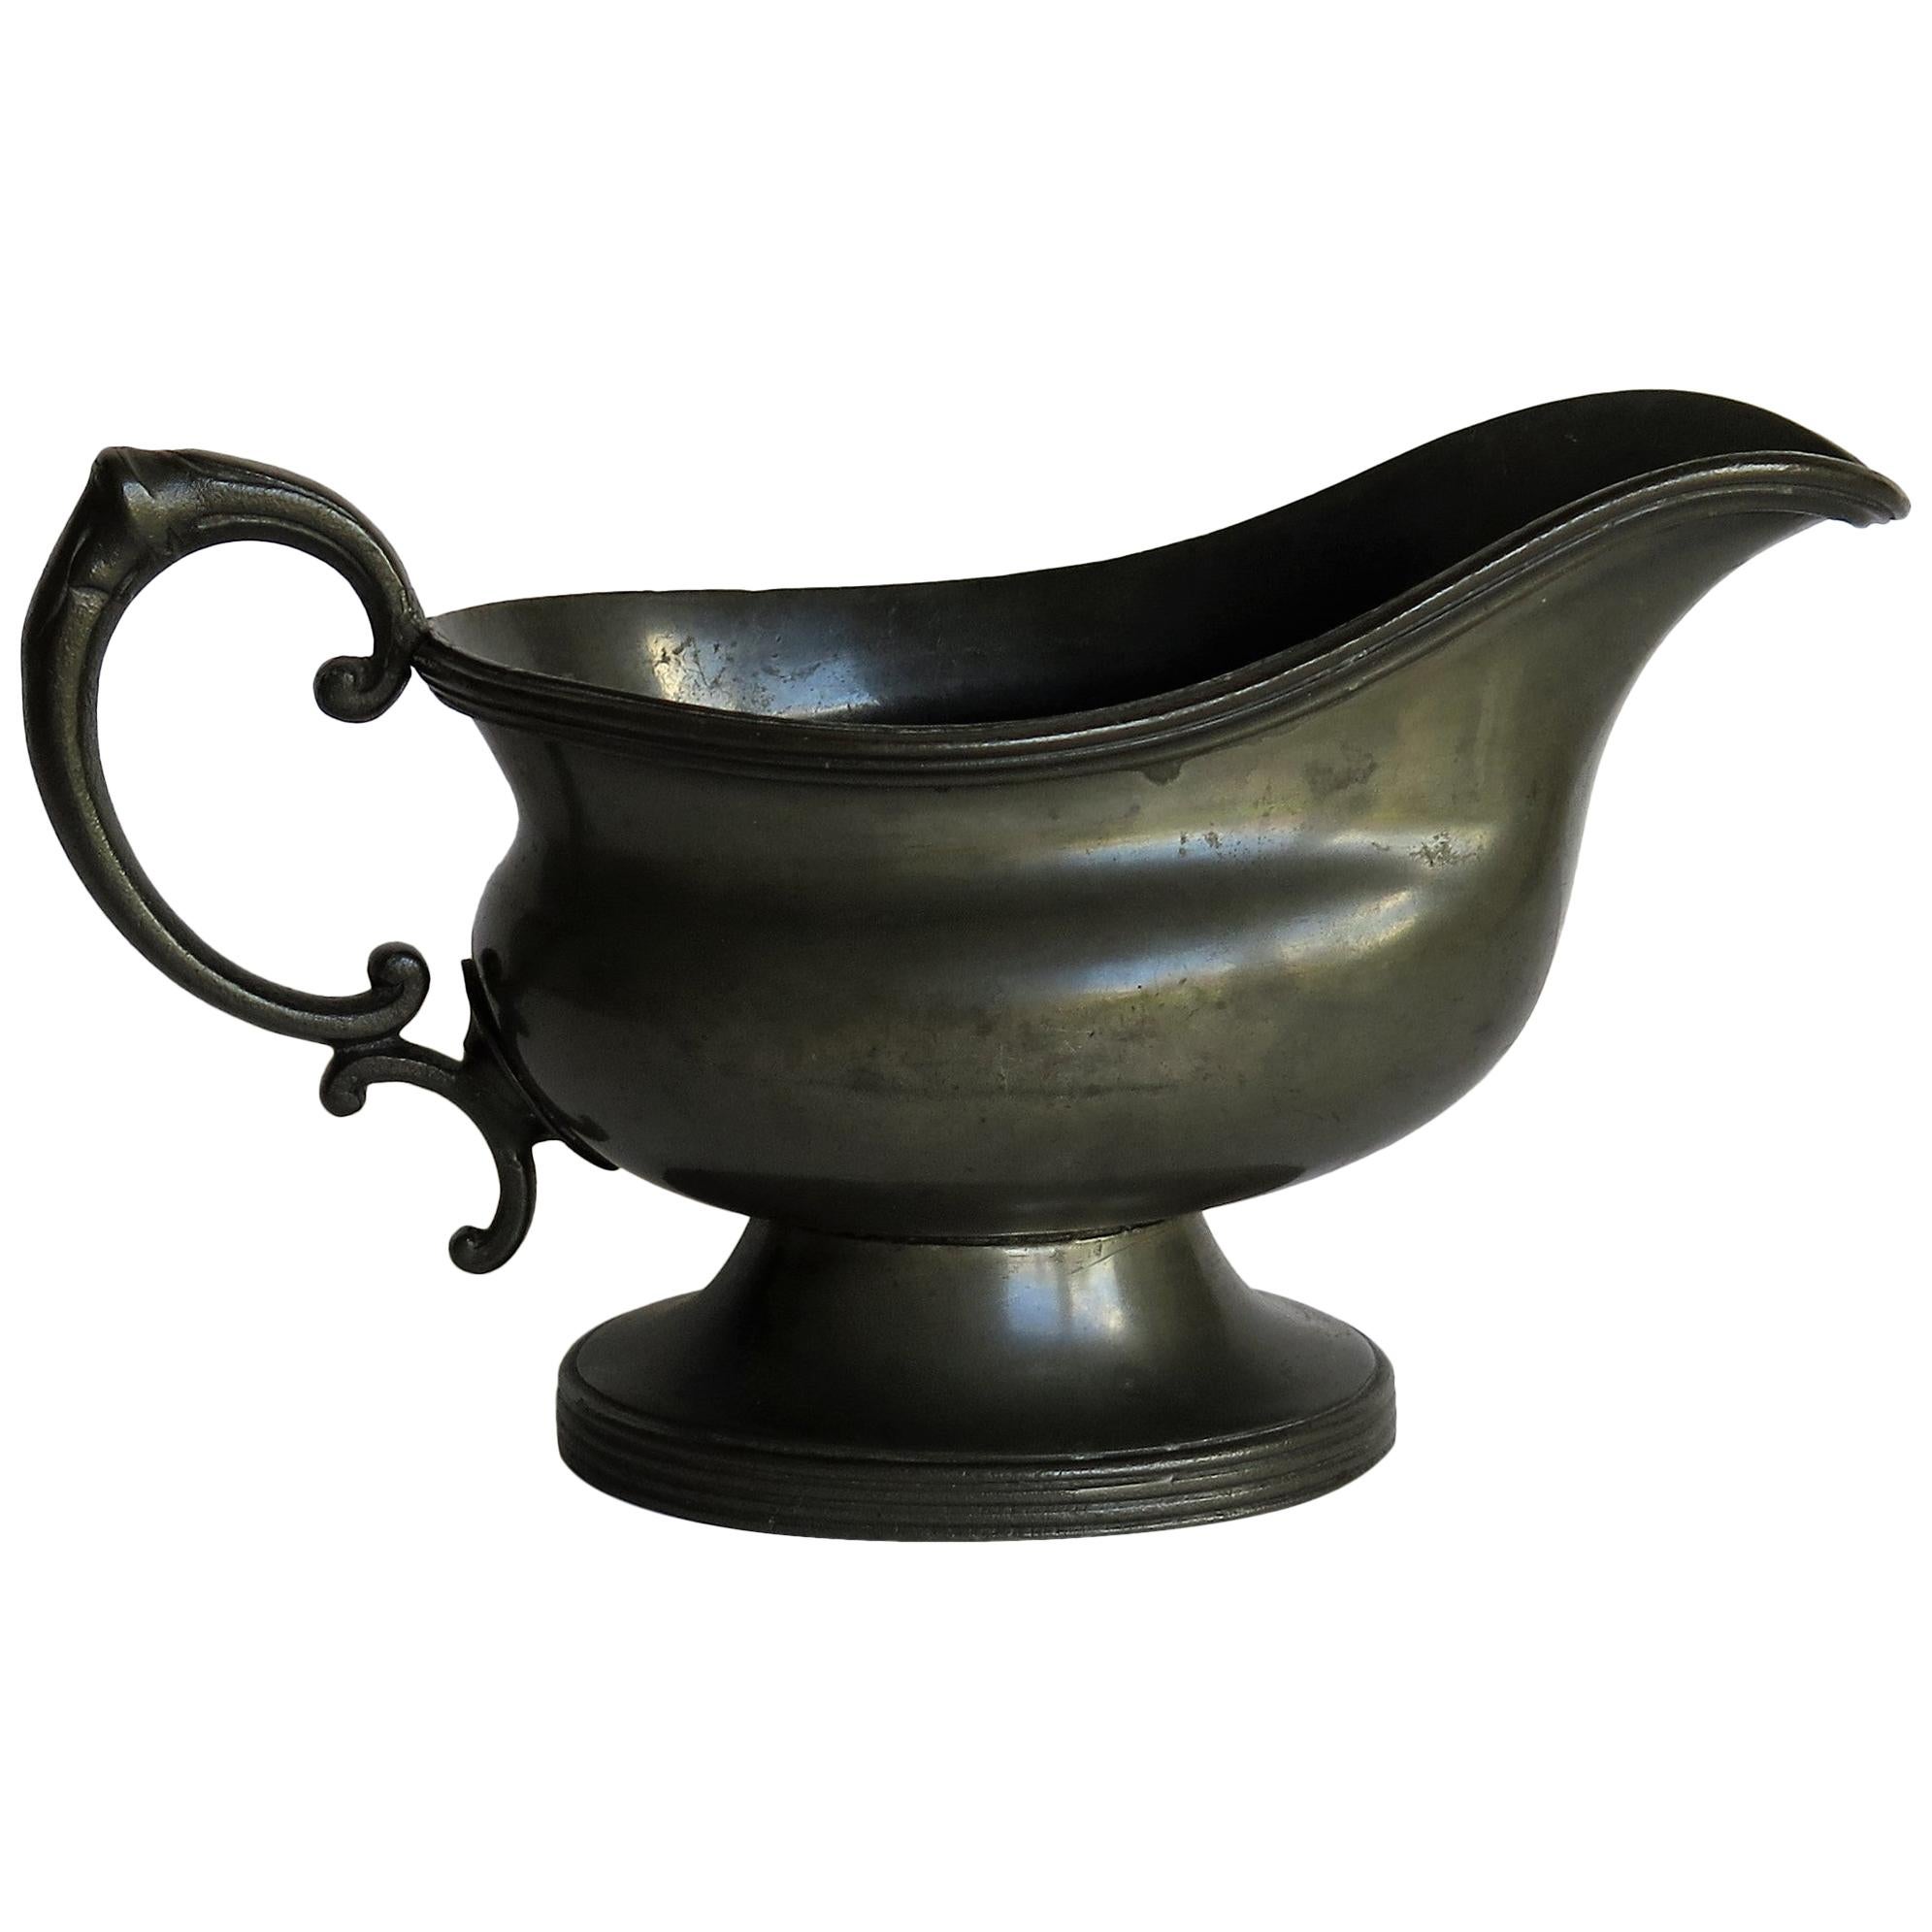 Pewter Sauce Boat by Walker & Hall of Sheffield Fully Stamped, Late 19th Century For Sale